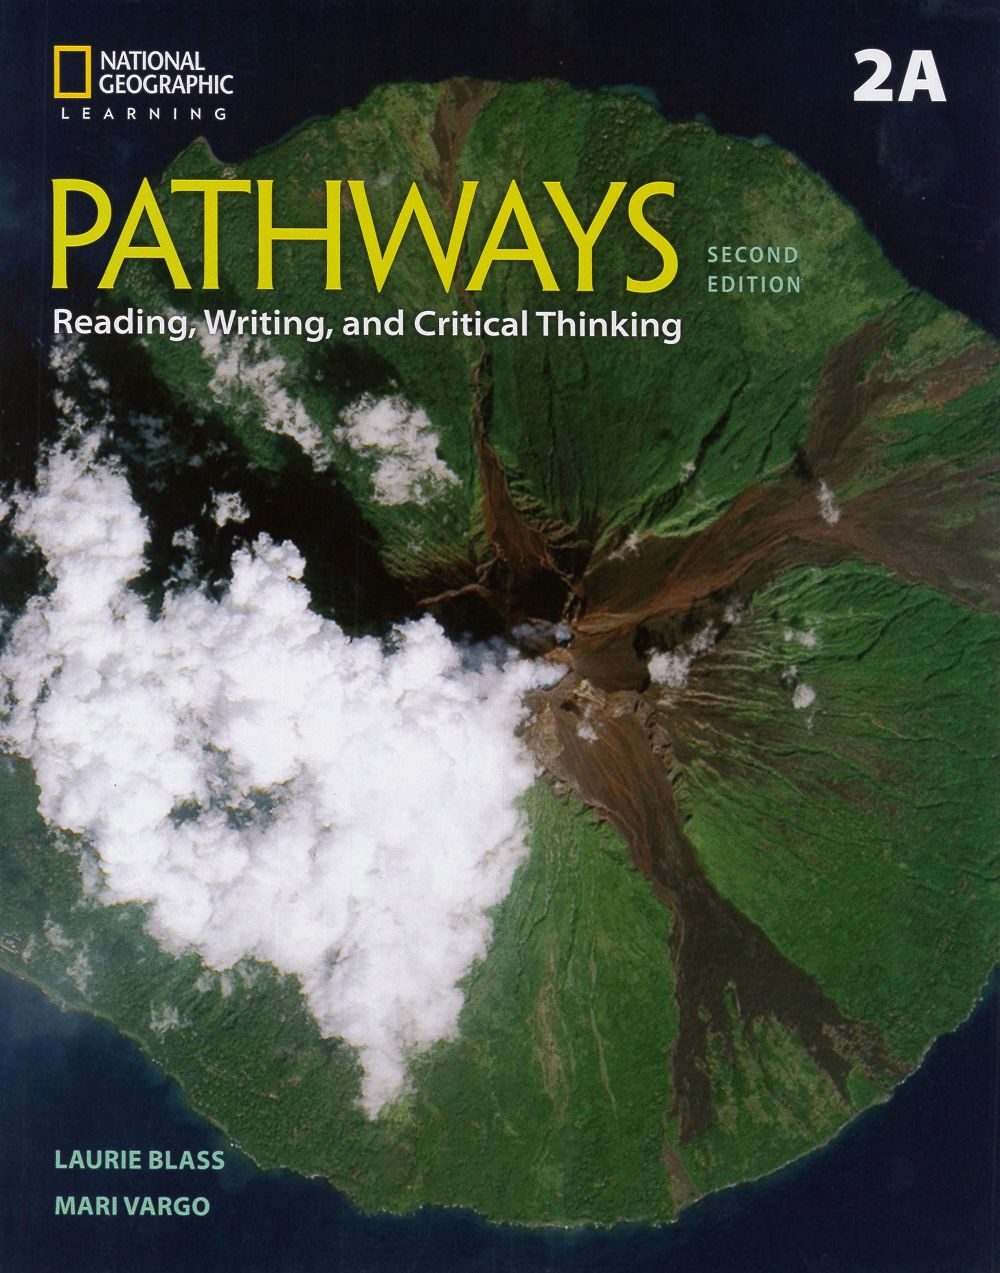 Pathways: Reading, Writing, and Critical Thinking (2A) 2/e Split